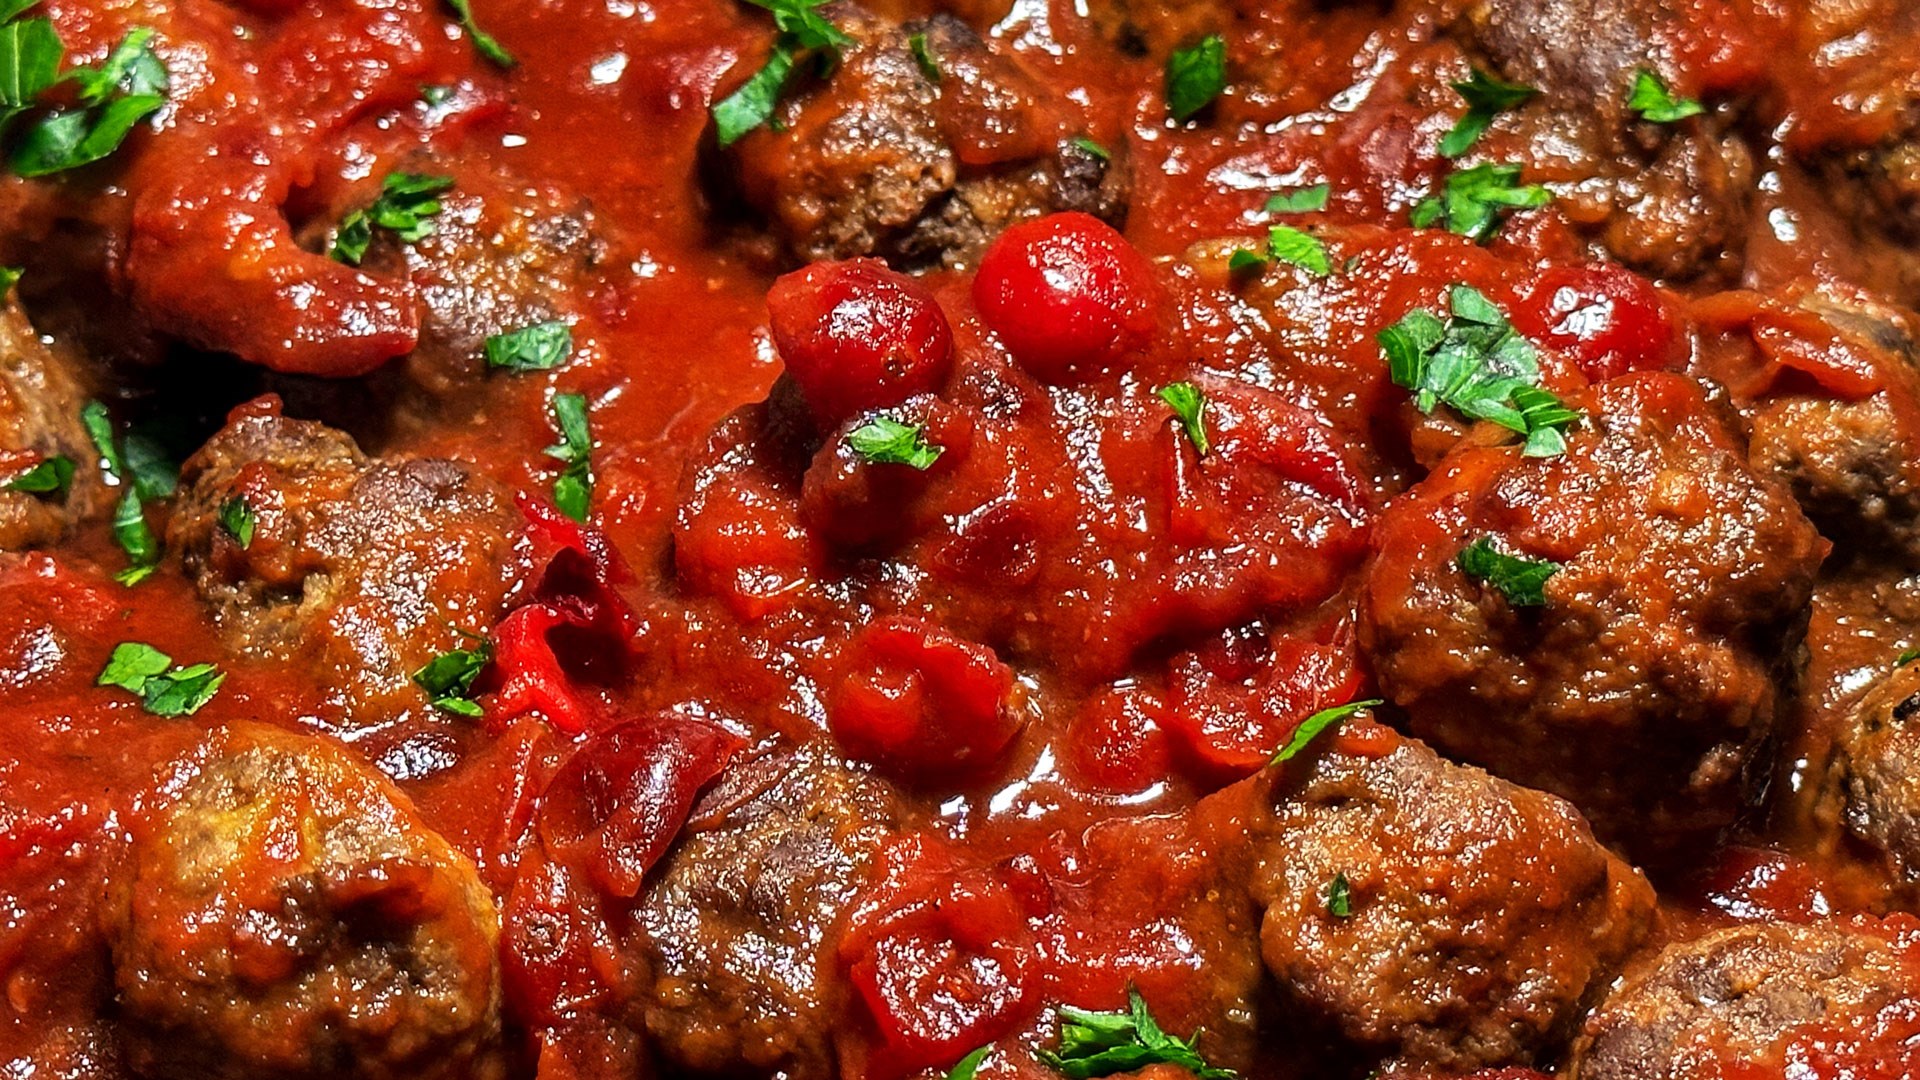 Up close with the berries on a meatball